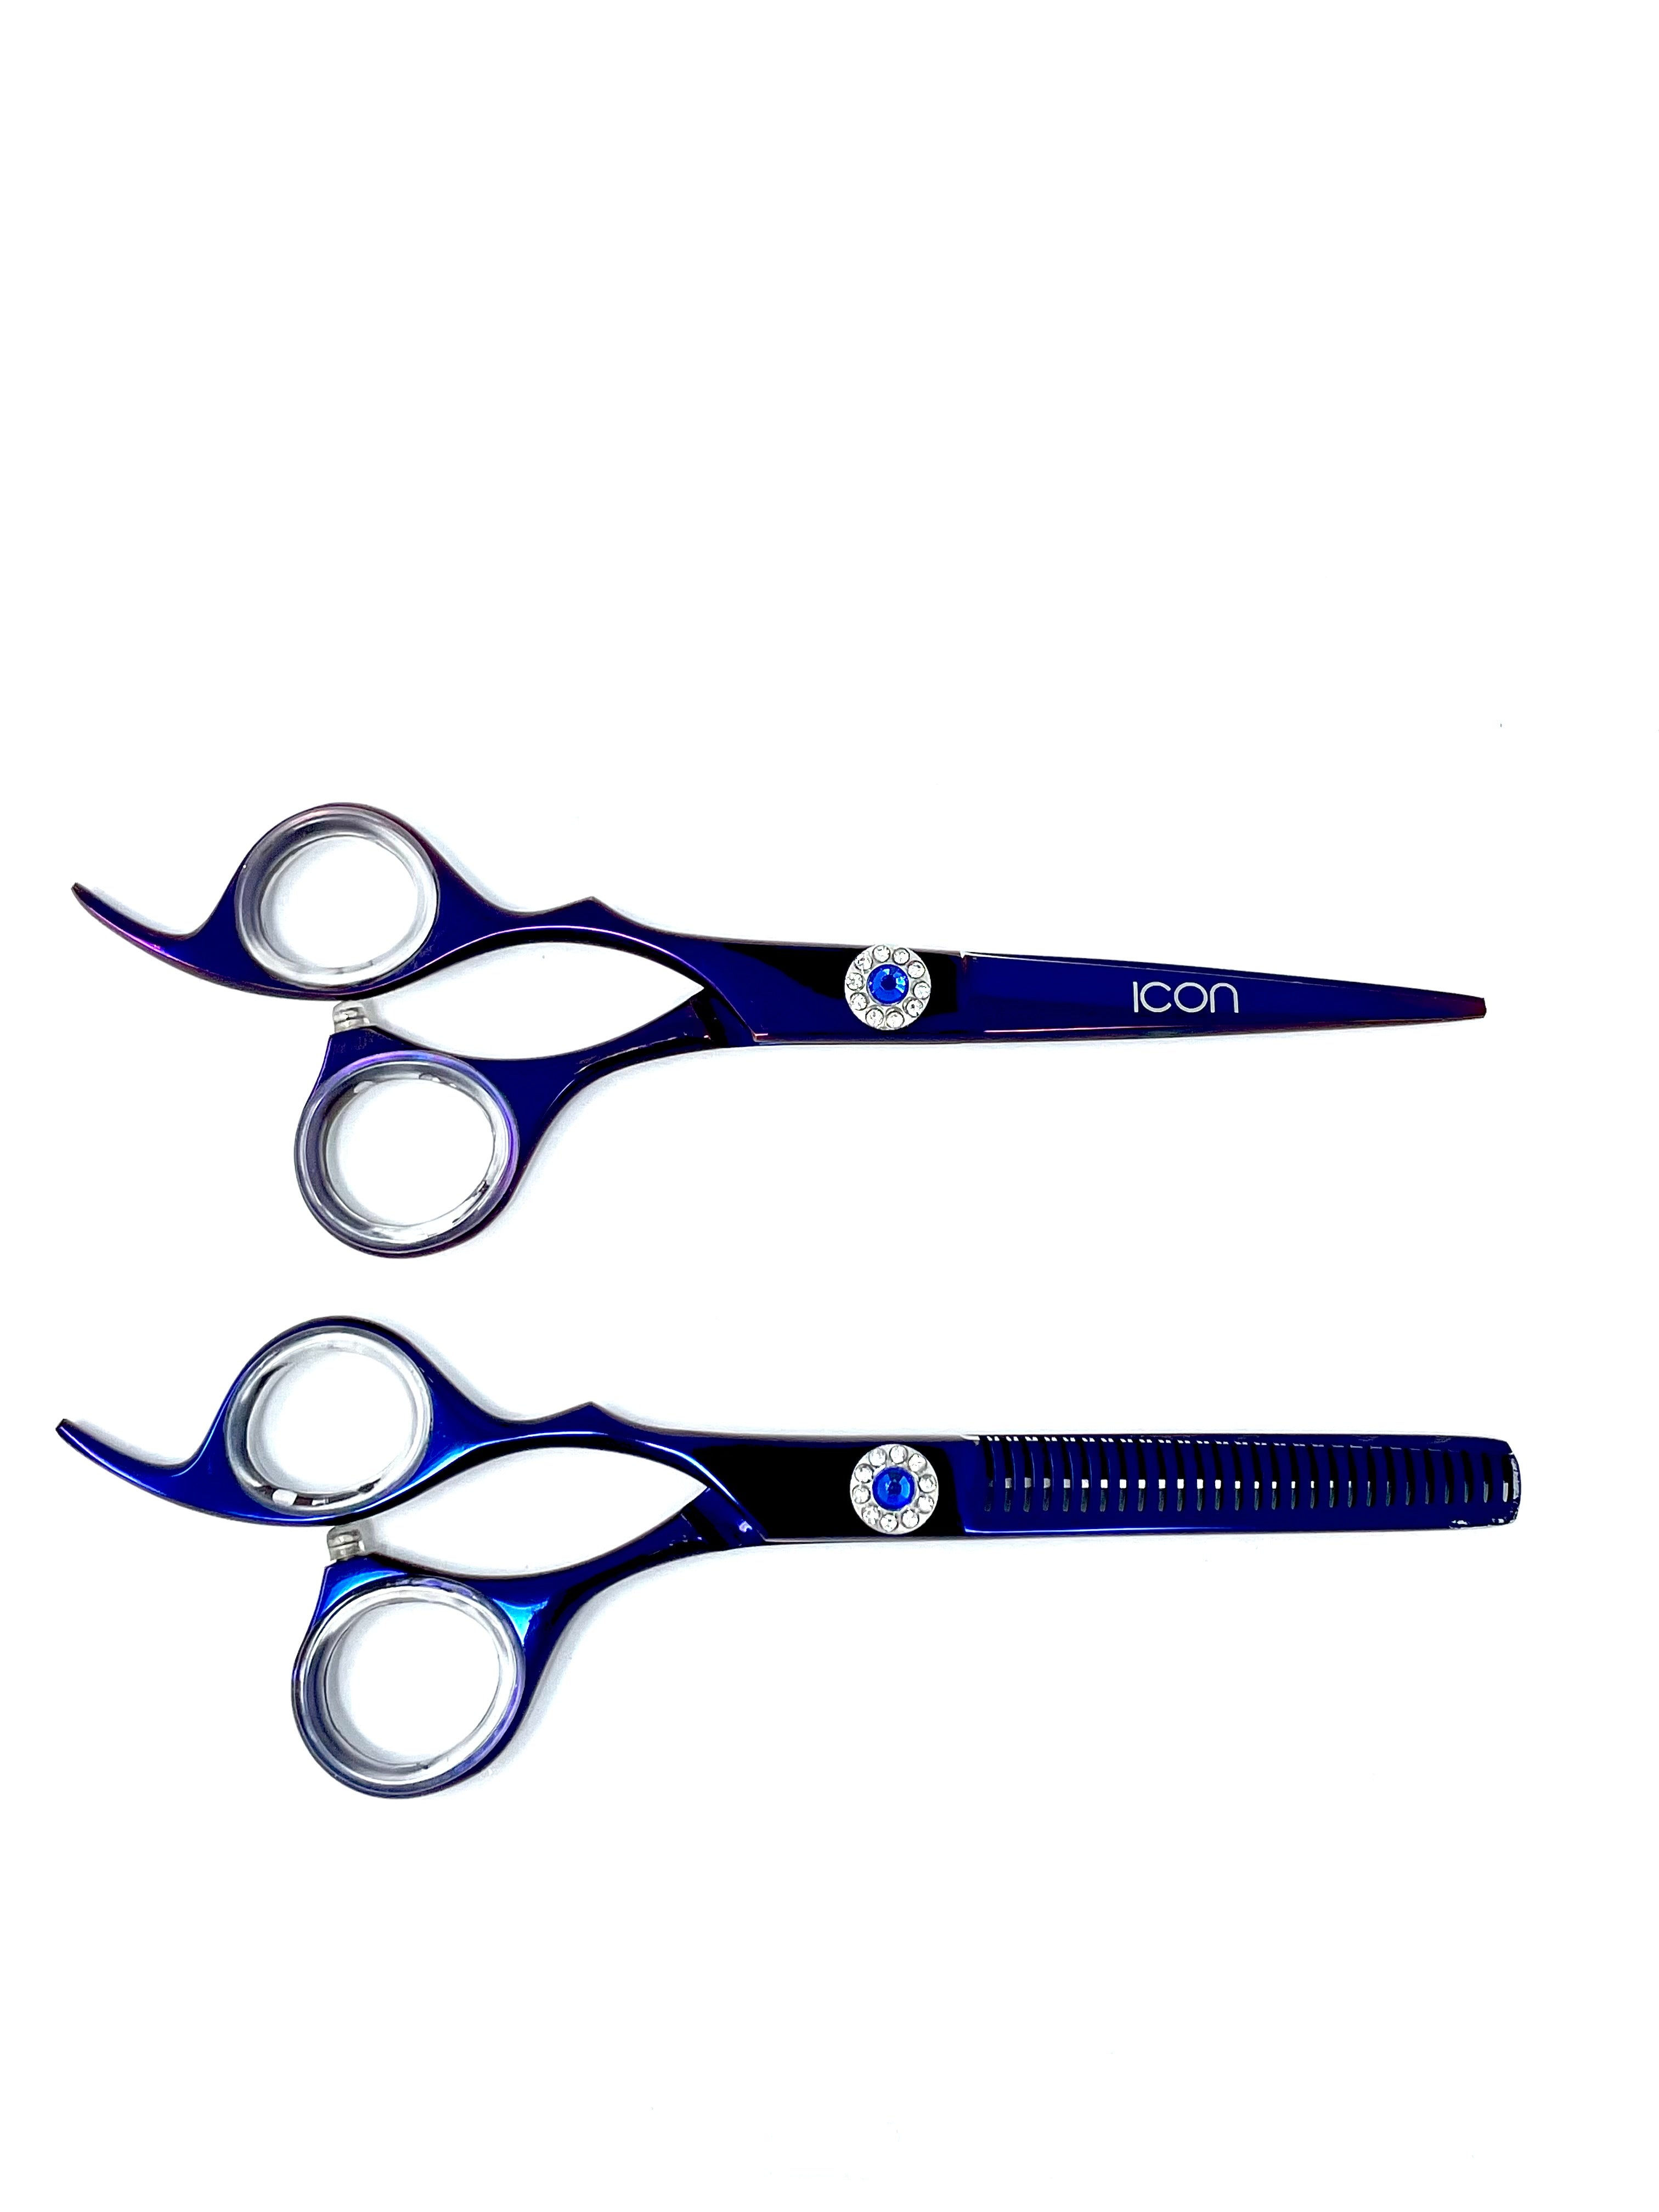 icon purple left handed professional hairstyling shear set thinning salon cosmetology scissors